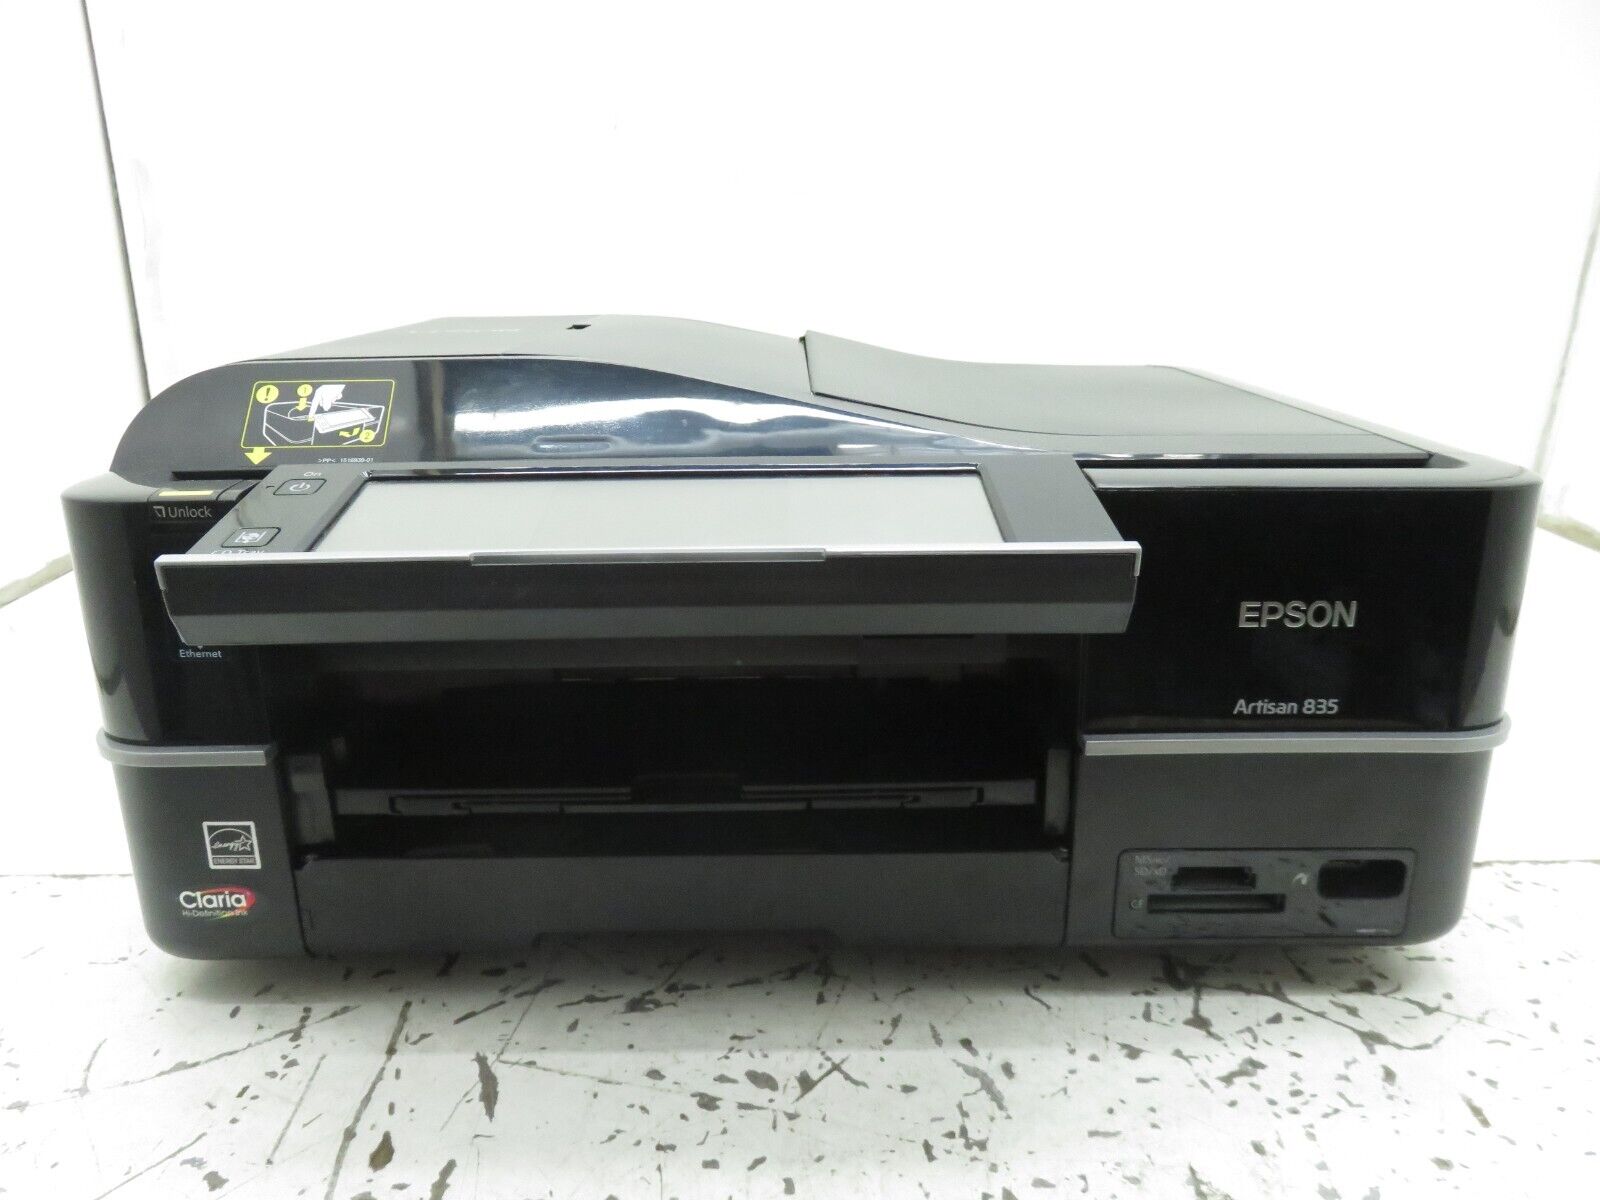 Epson Artisan 800 All-in-one Color Printer Touchscreen - No Ink